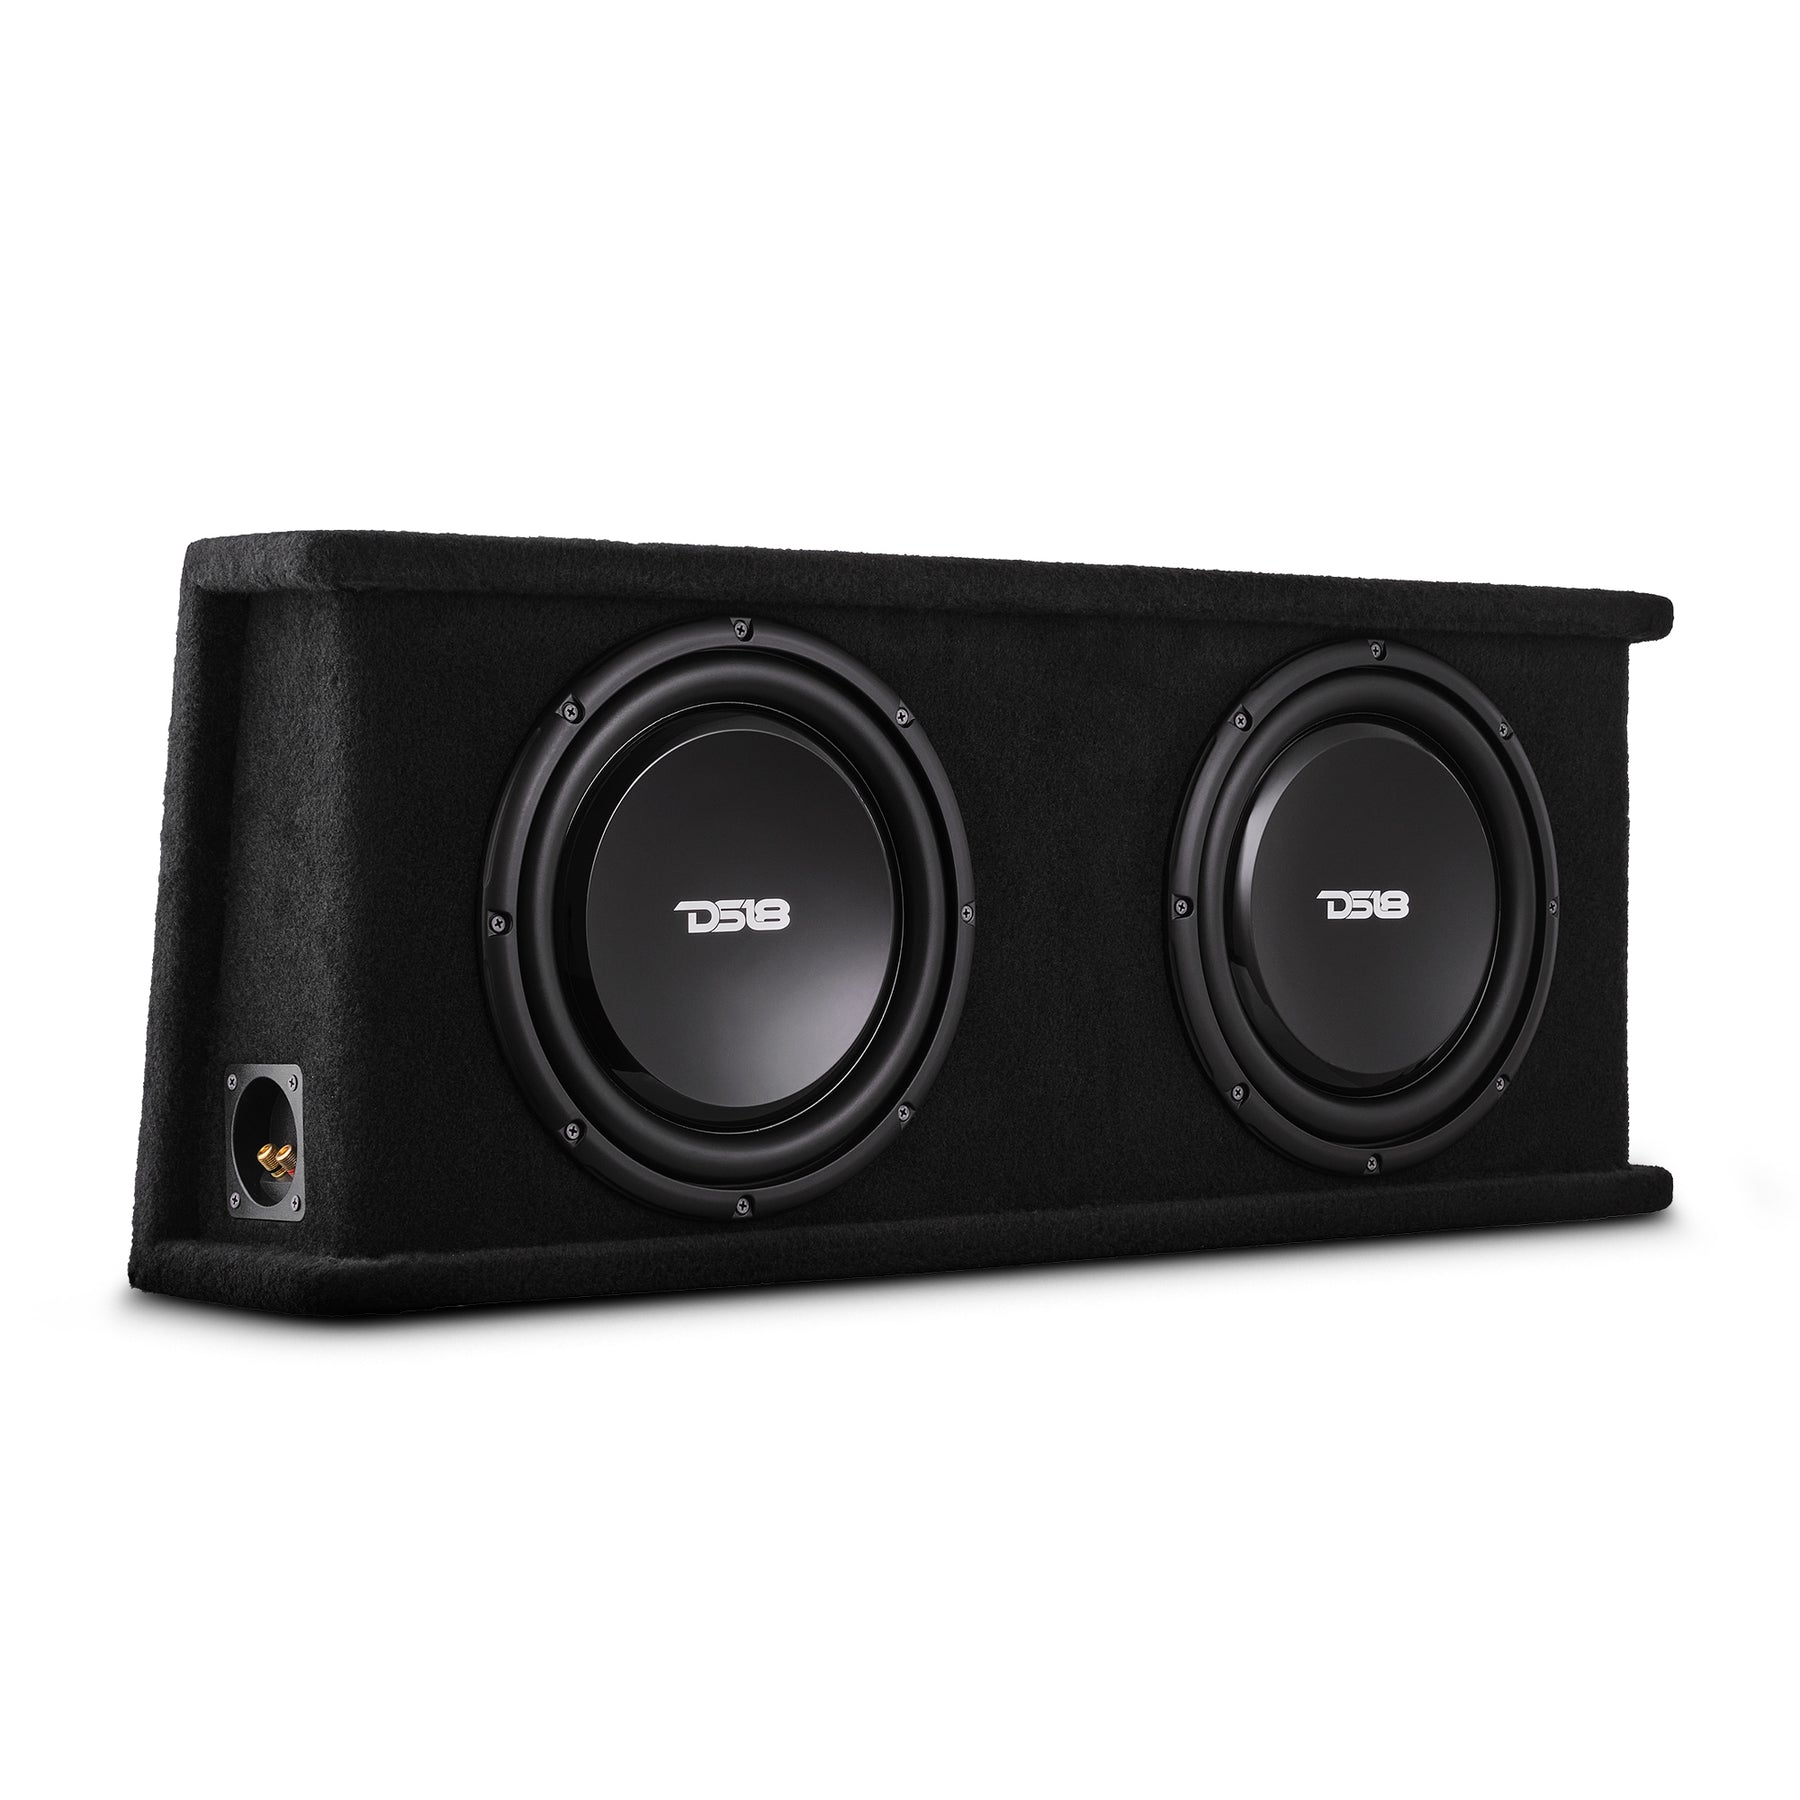 12" Loaded Shallow Subwoofer Enclosure 700 Watts Rms @ 1 ohm